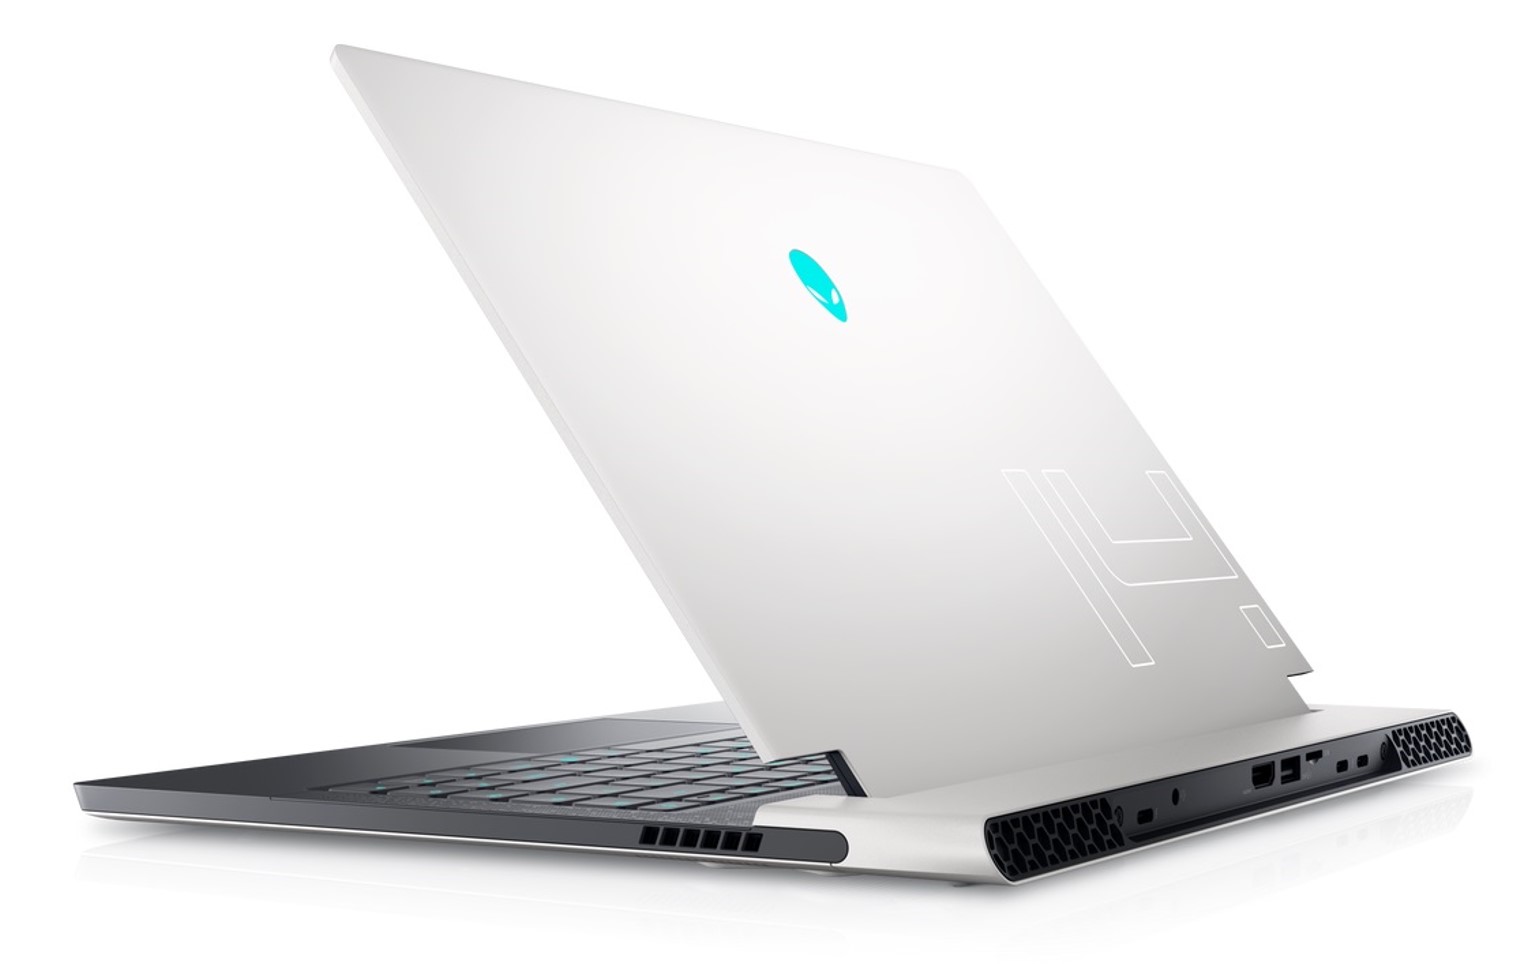 Alienware Removed 2022-09-05 10:10:09.605 